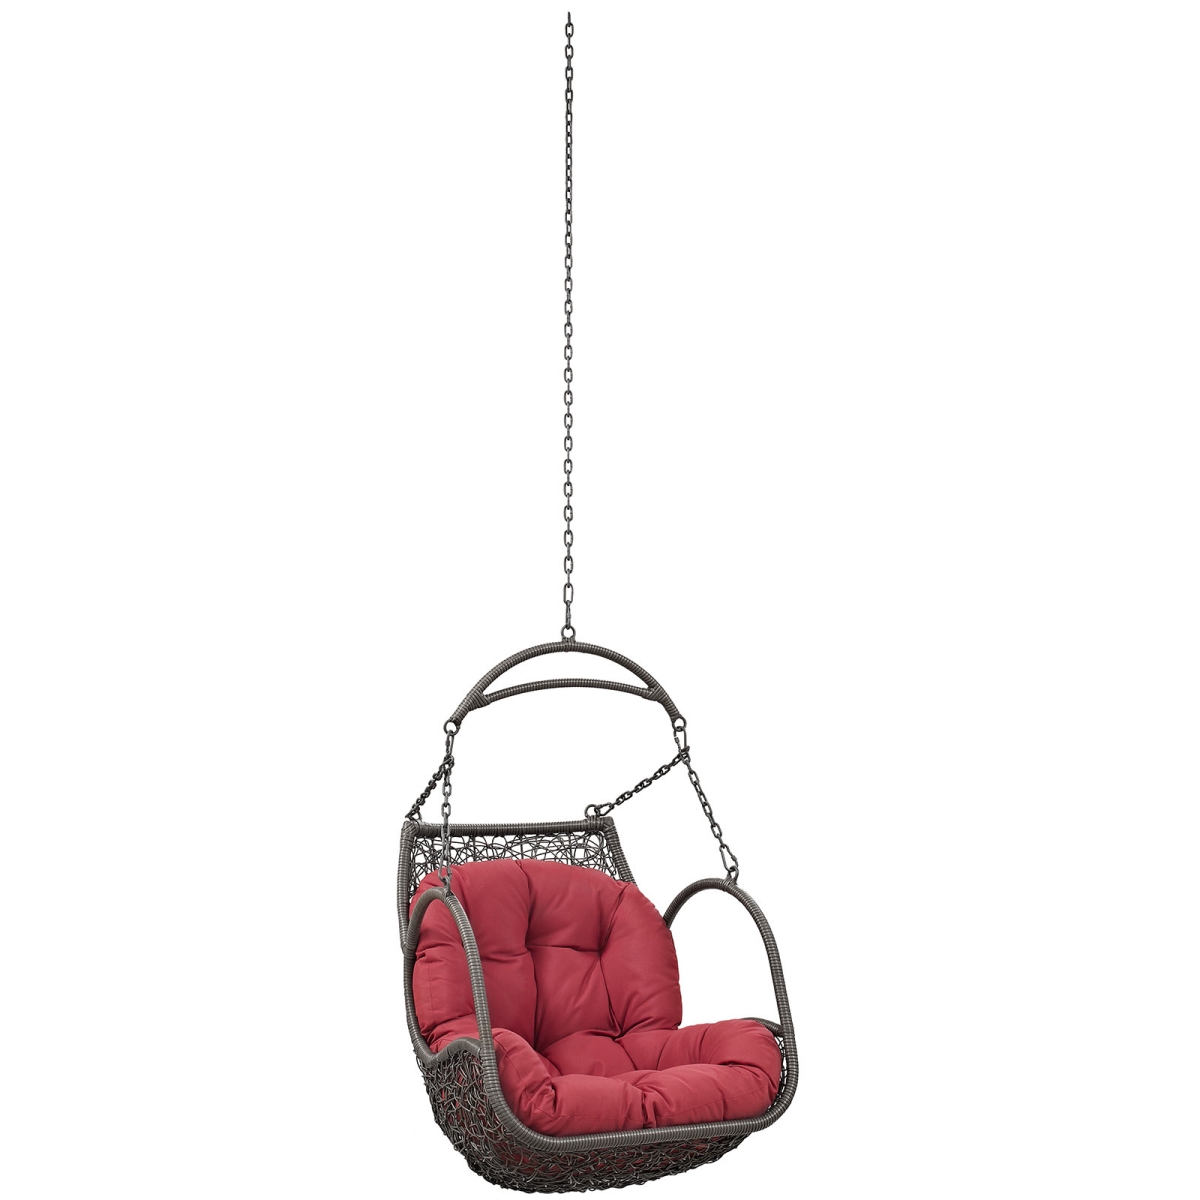 Modway Eei-2659-red-set 127.5 H X 29.5 W X 24.5 L In. Arbor Outdoor Patio Swing Chair Without Stand, Red